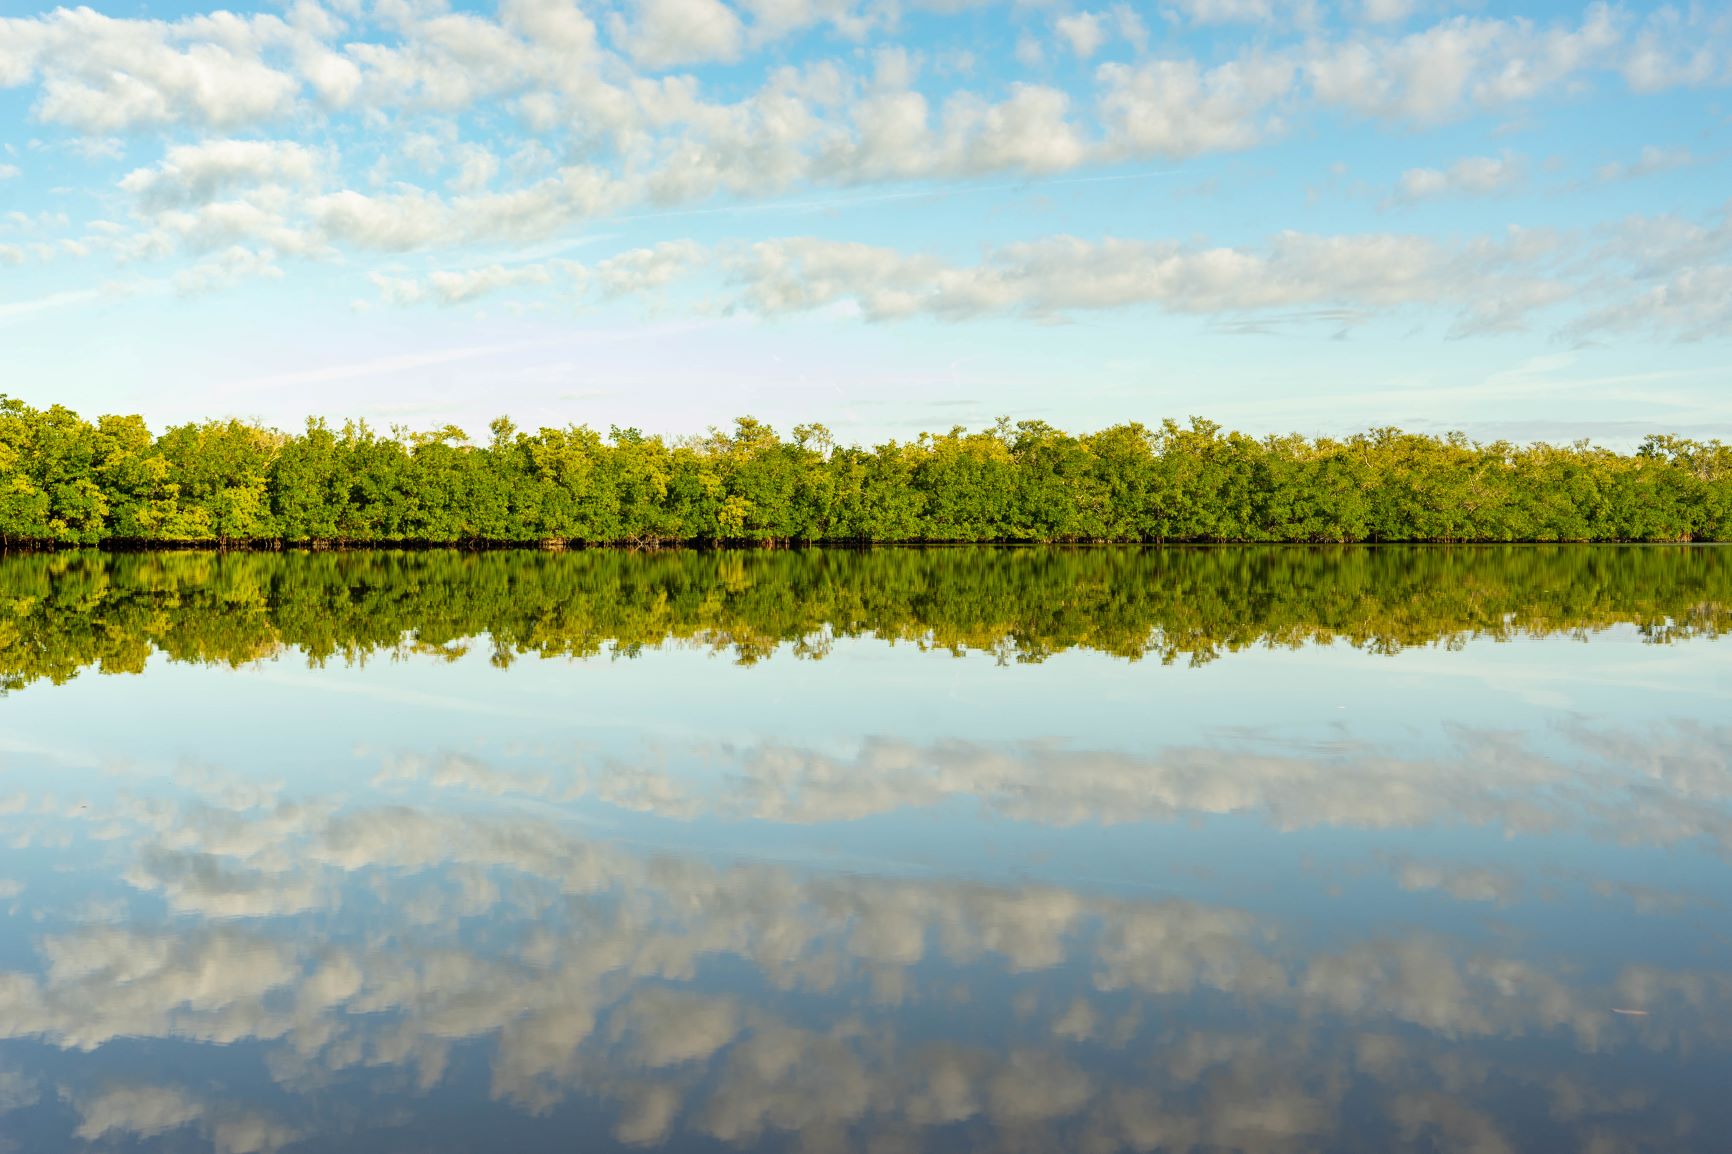 A line of mangroves and a blue with clouds reflected in the water